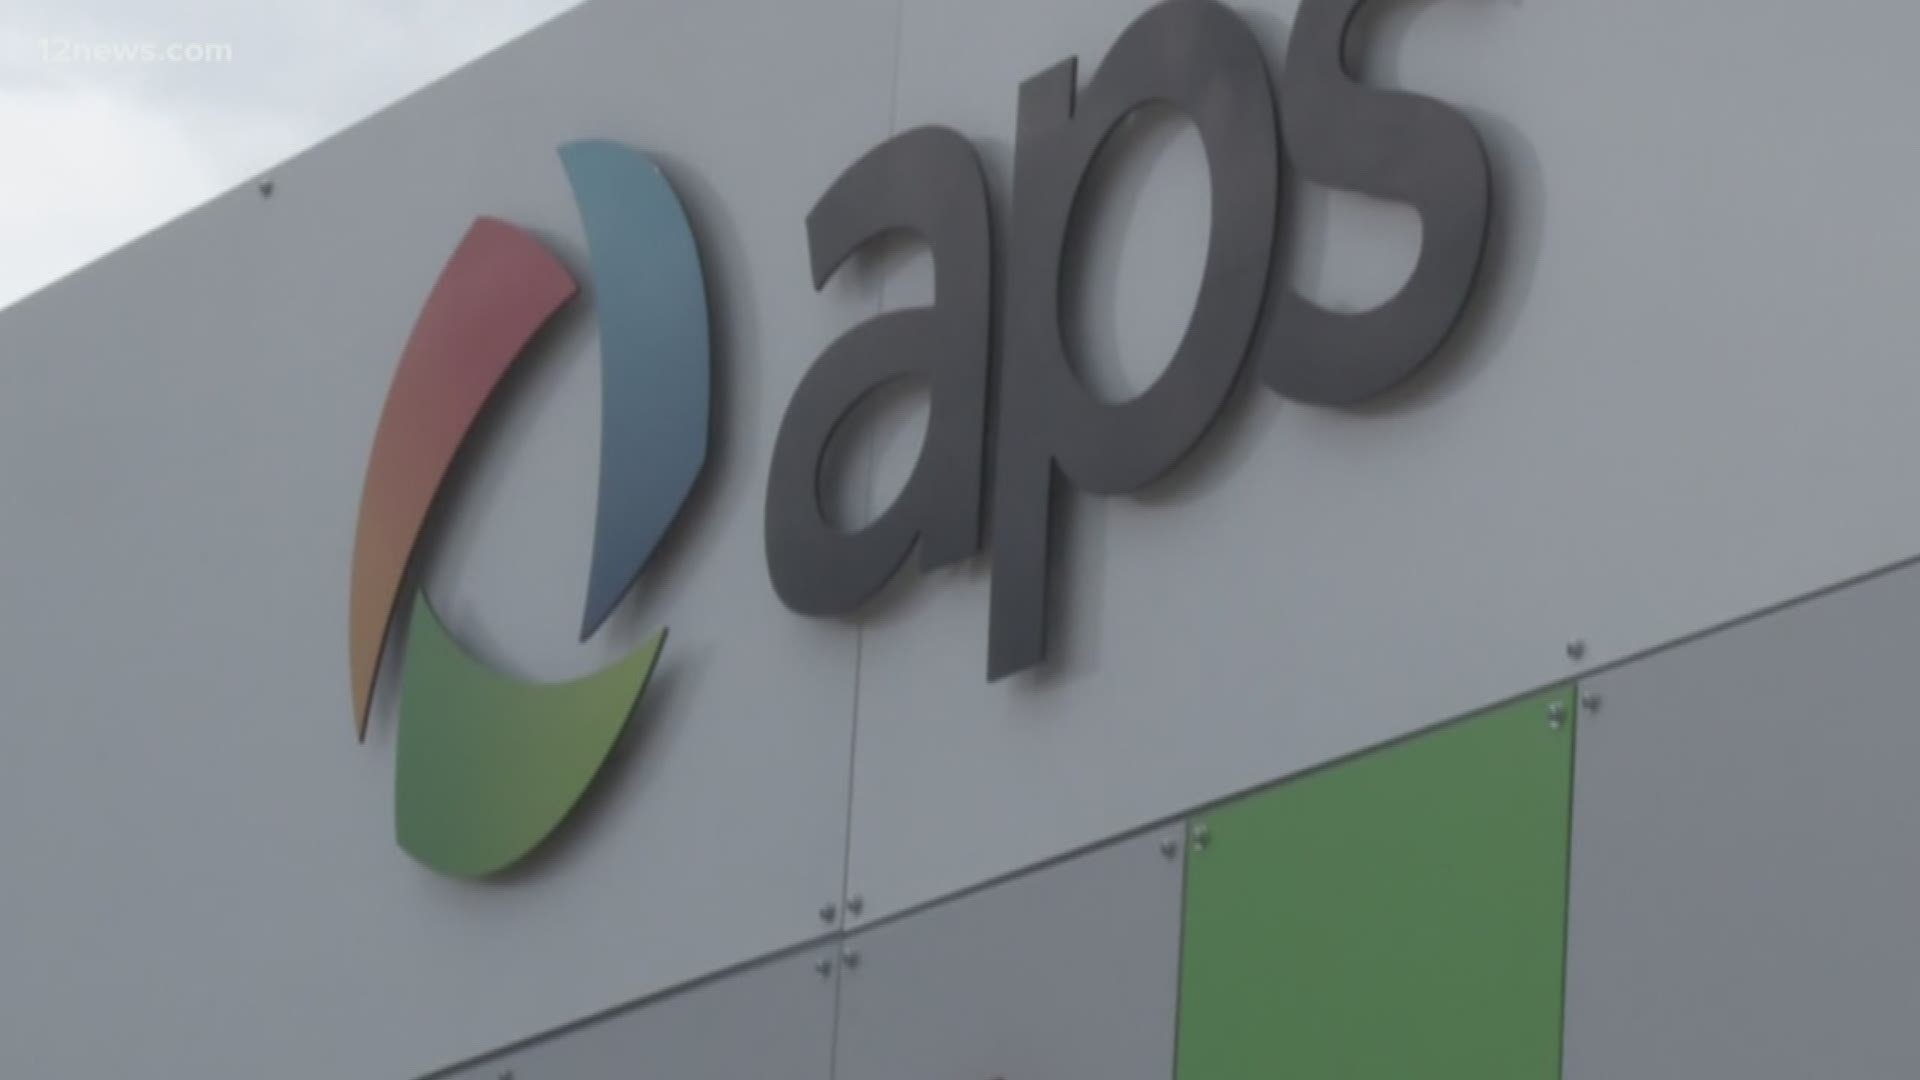 The Arizona State Corporation Commission is launching an inquiry into APS's rates. The inquiry comes after a rate challenge and complaints from APS customers.